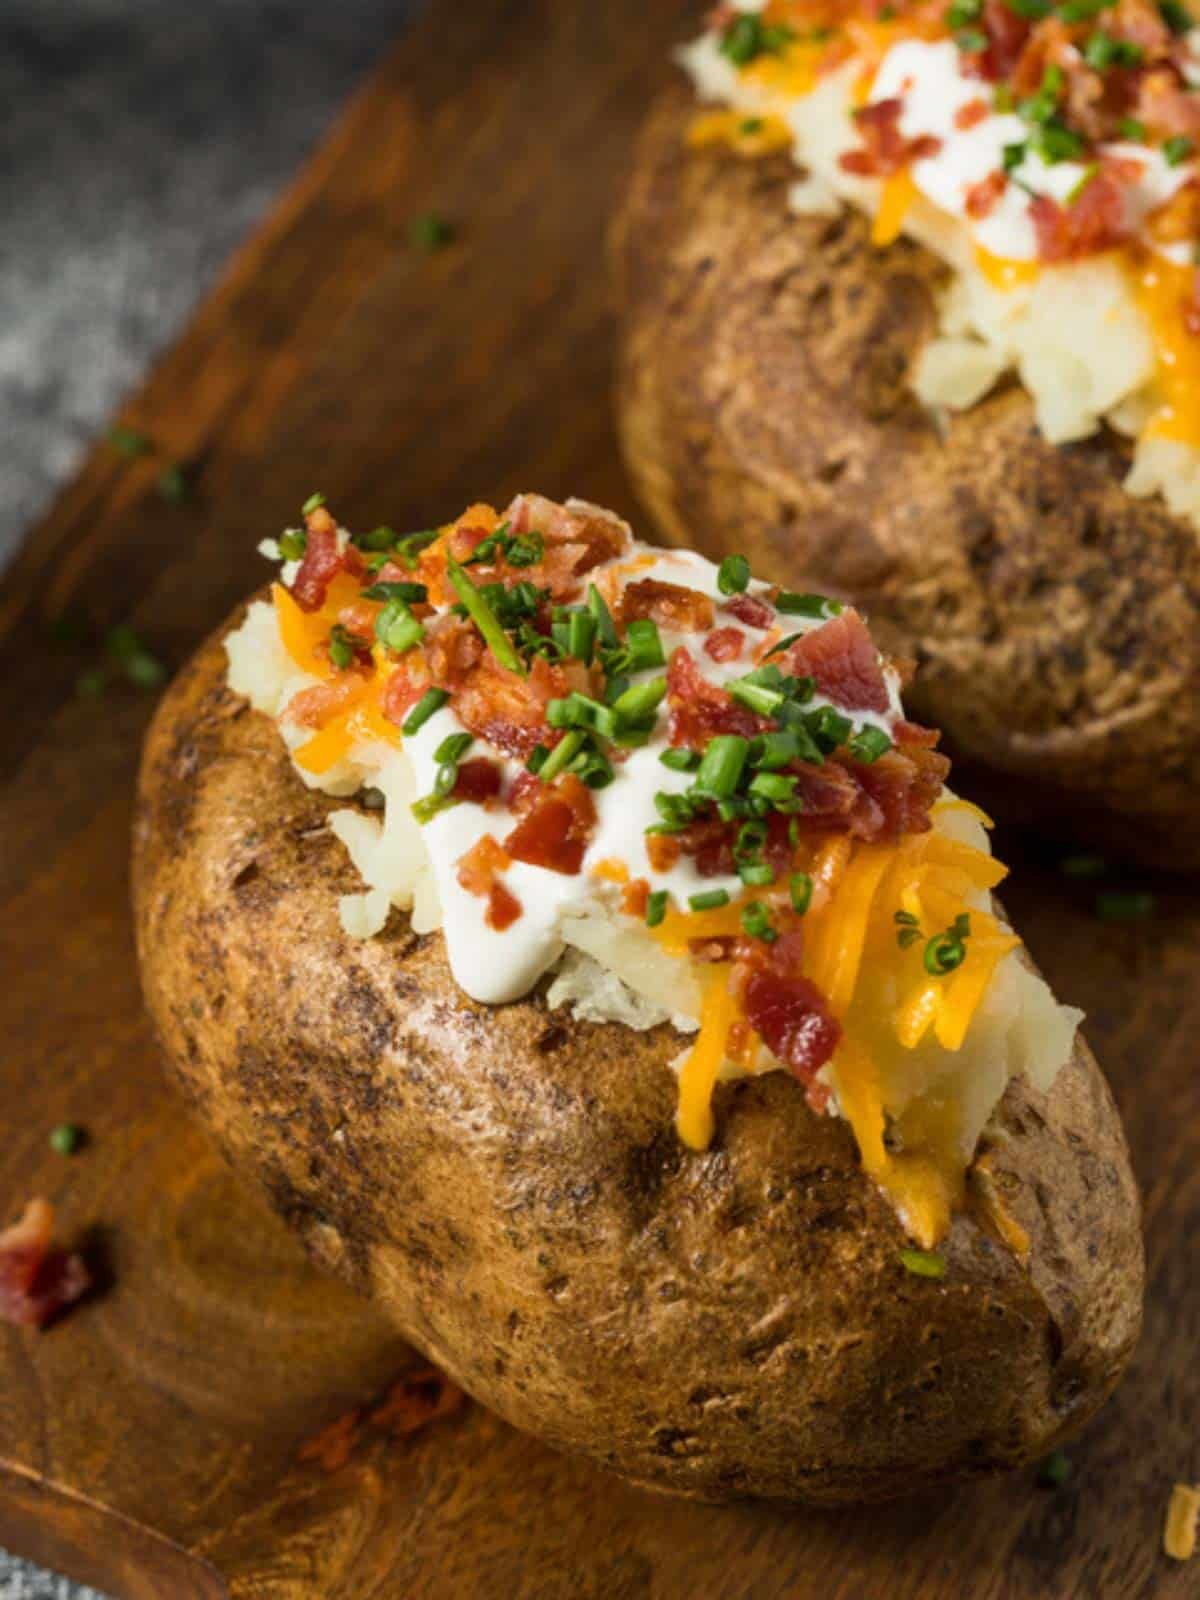 two baked potatoes cut open and stuffed with sour cream, cheese and bacon